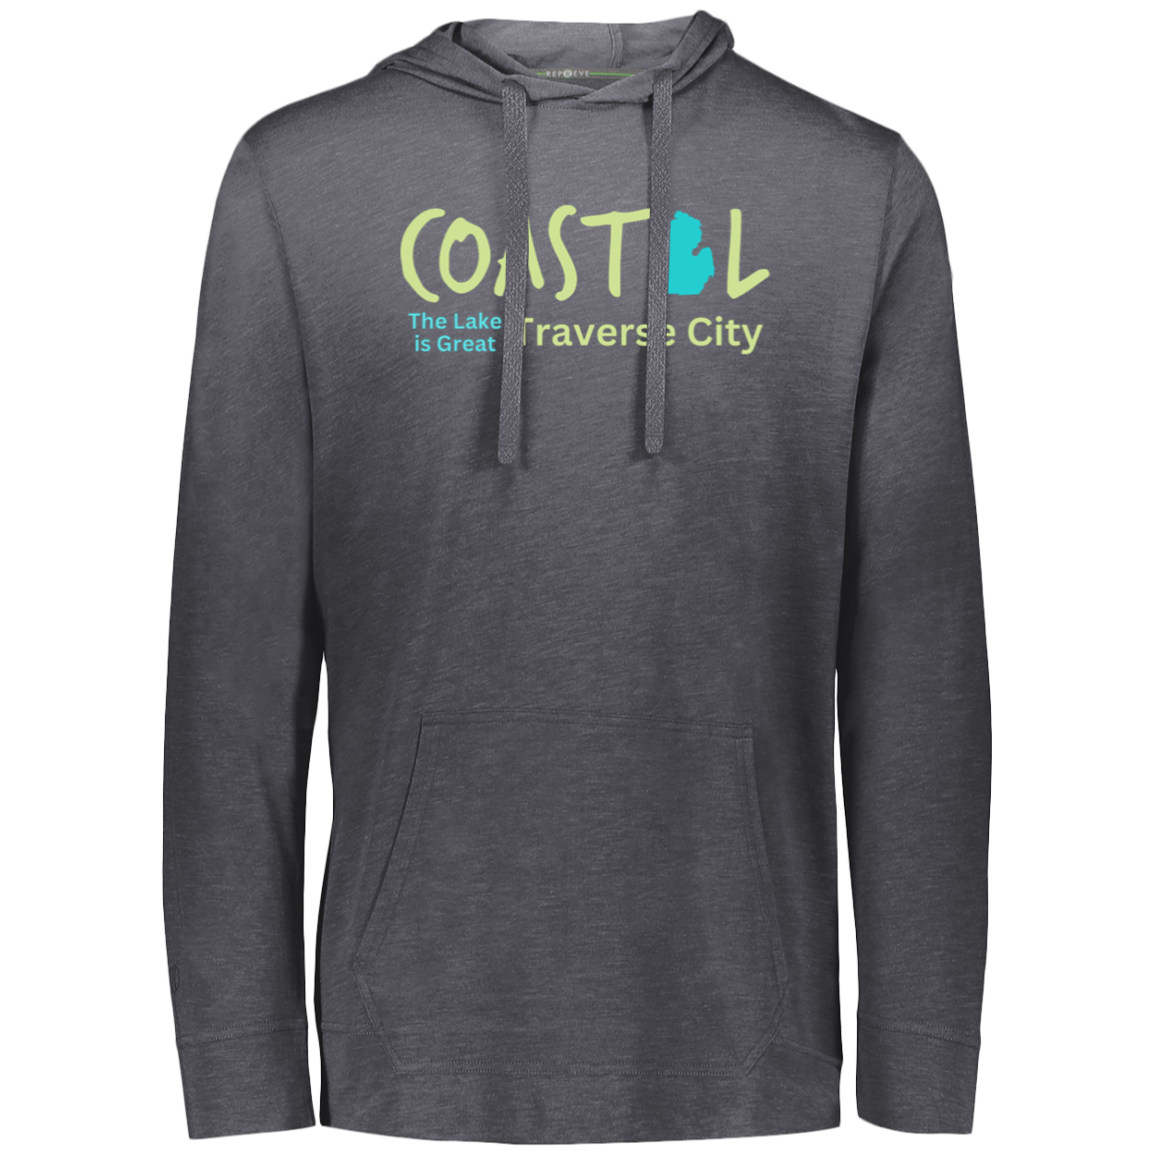 Coastal The Lake is Great Traverse City Eco Lightweight Hoodie